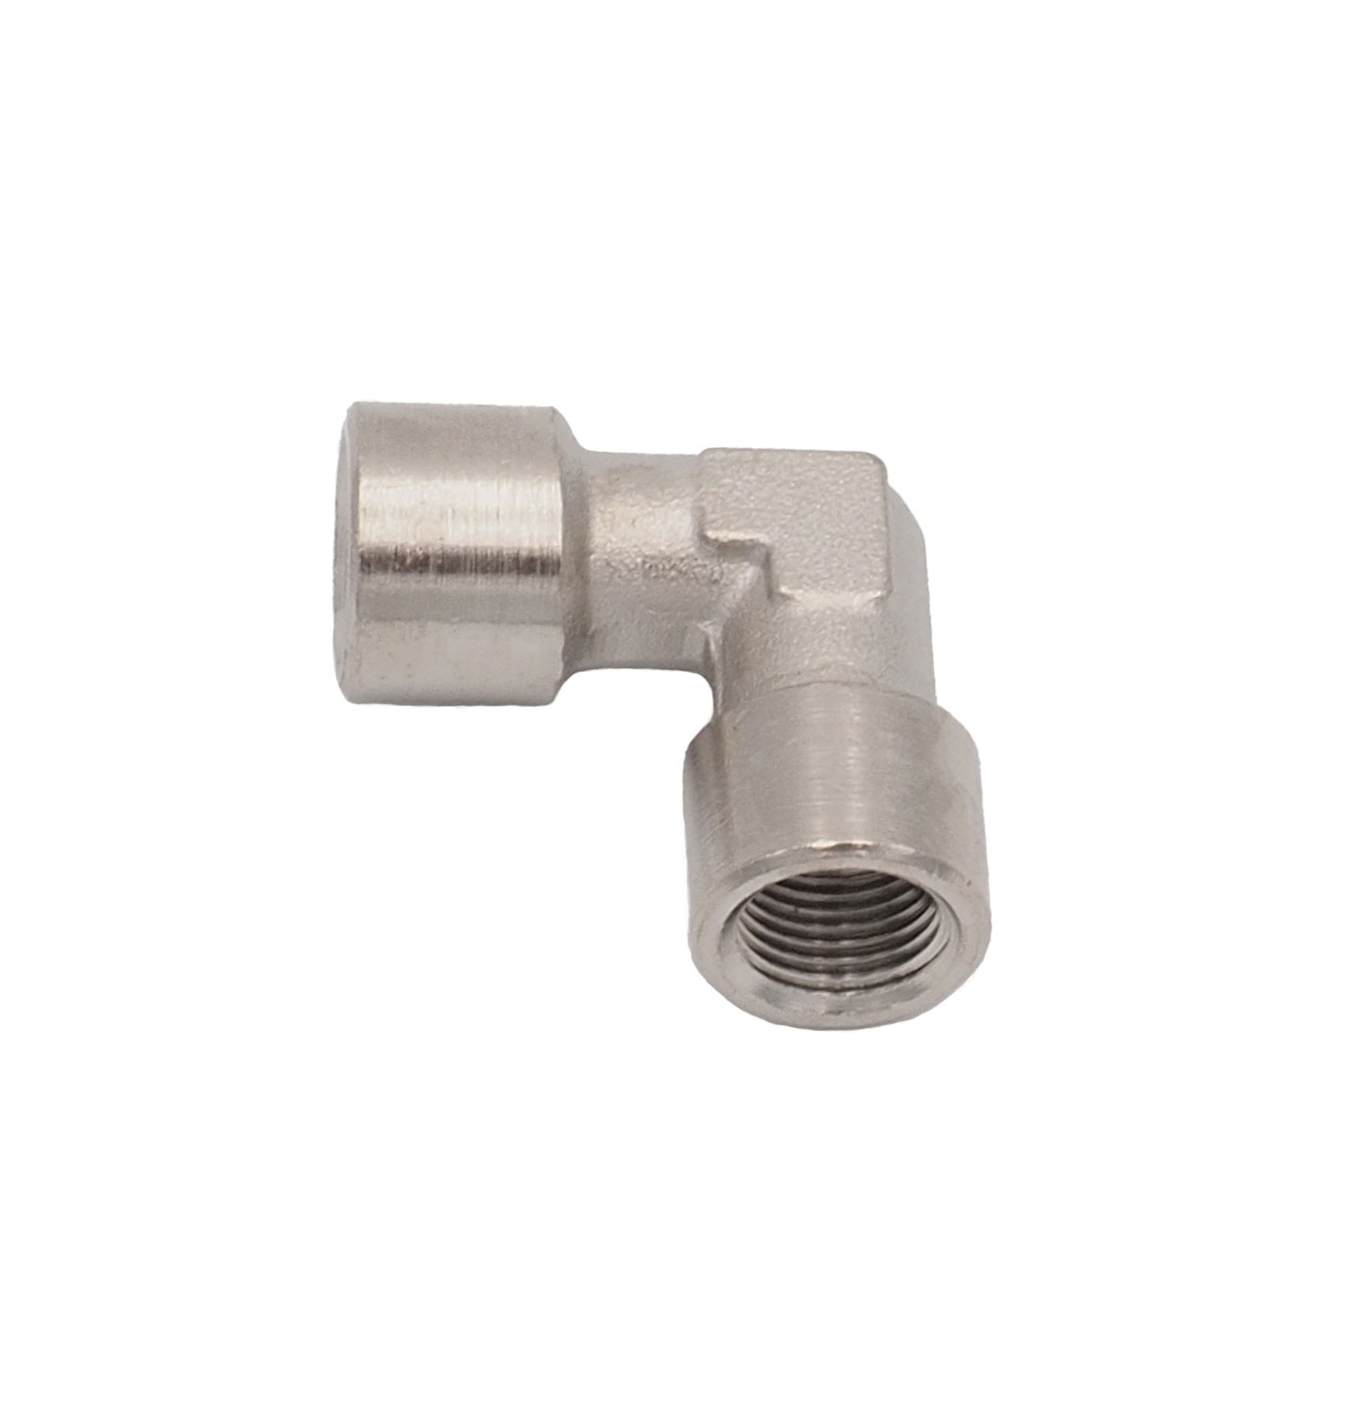 Angle 1/8" IT/IT, nickel-plated brass